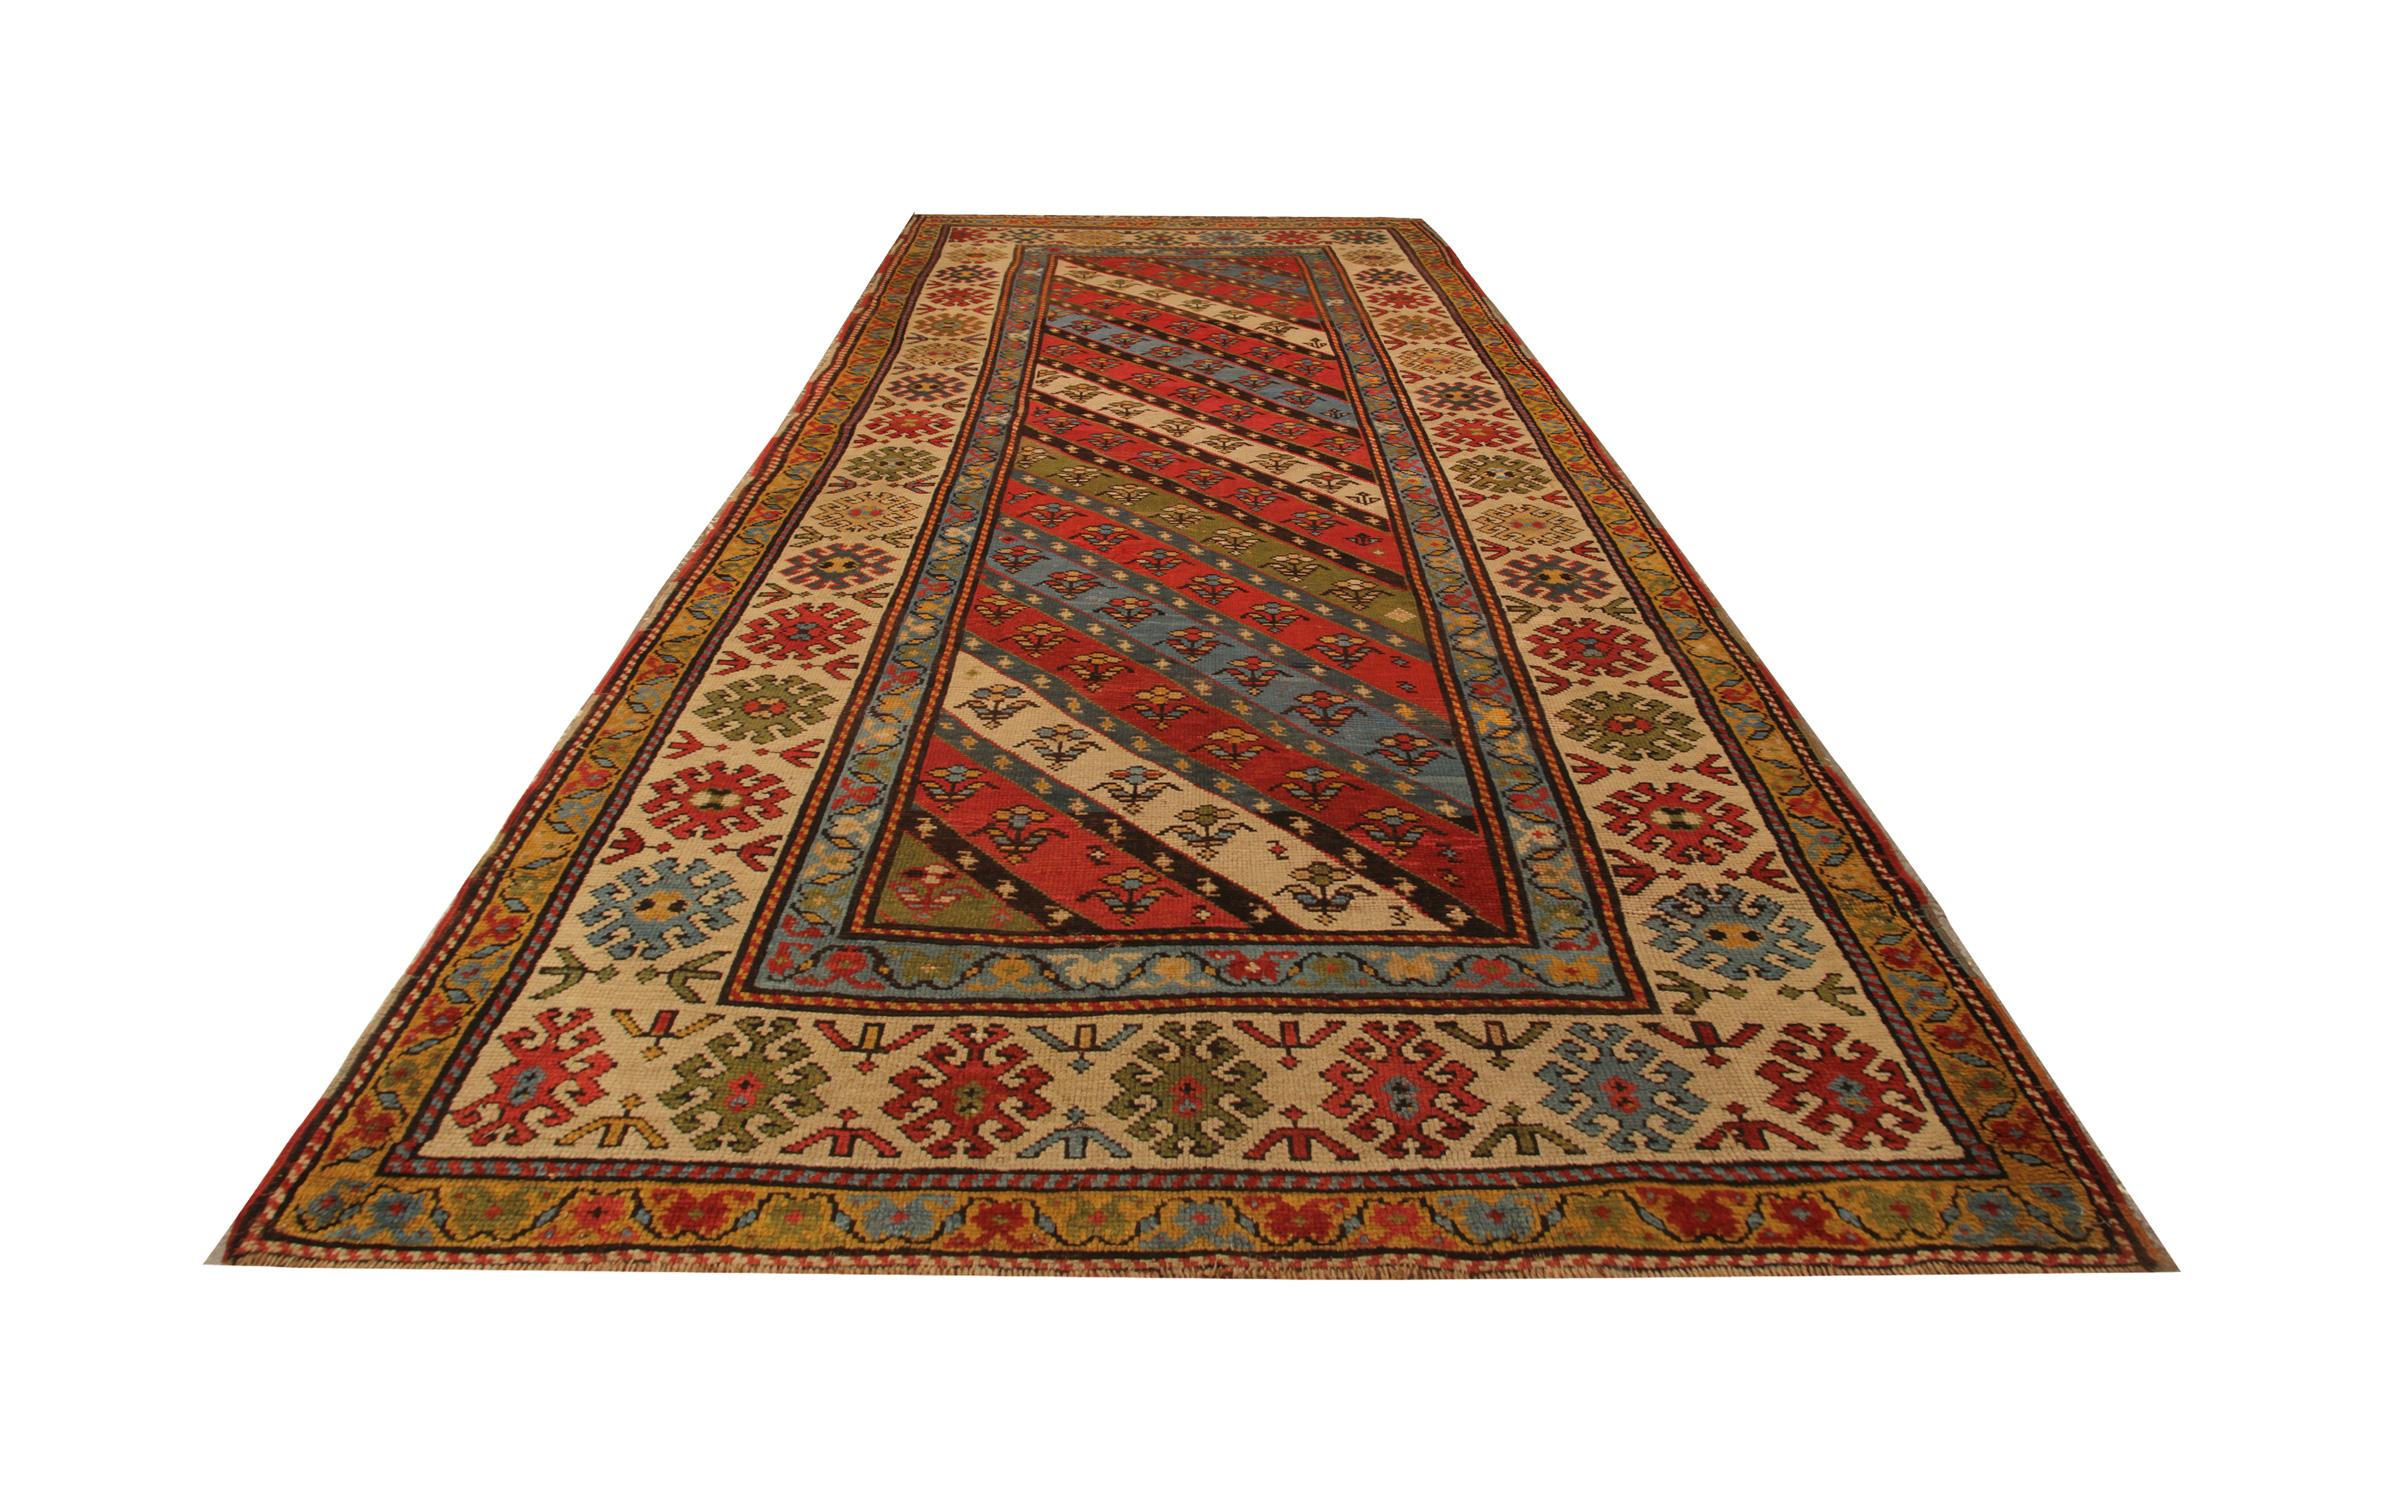 An excellent example of traditional Caucasian handmade carpet rug runner weaving from the Shirvan region. these Stripped ground design patterned rugs can be the best element of home decor objects to give warmth to the environment, because this woven